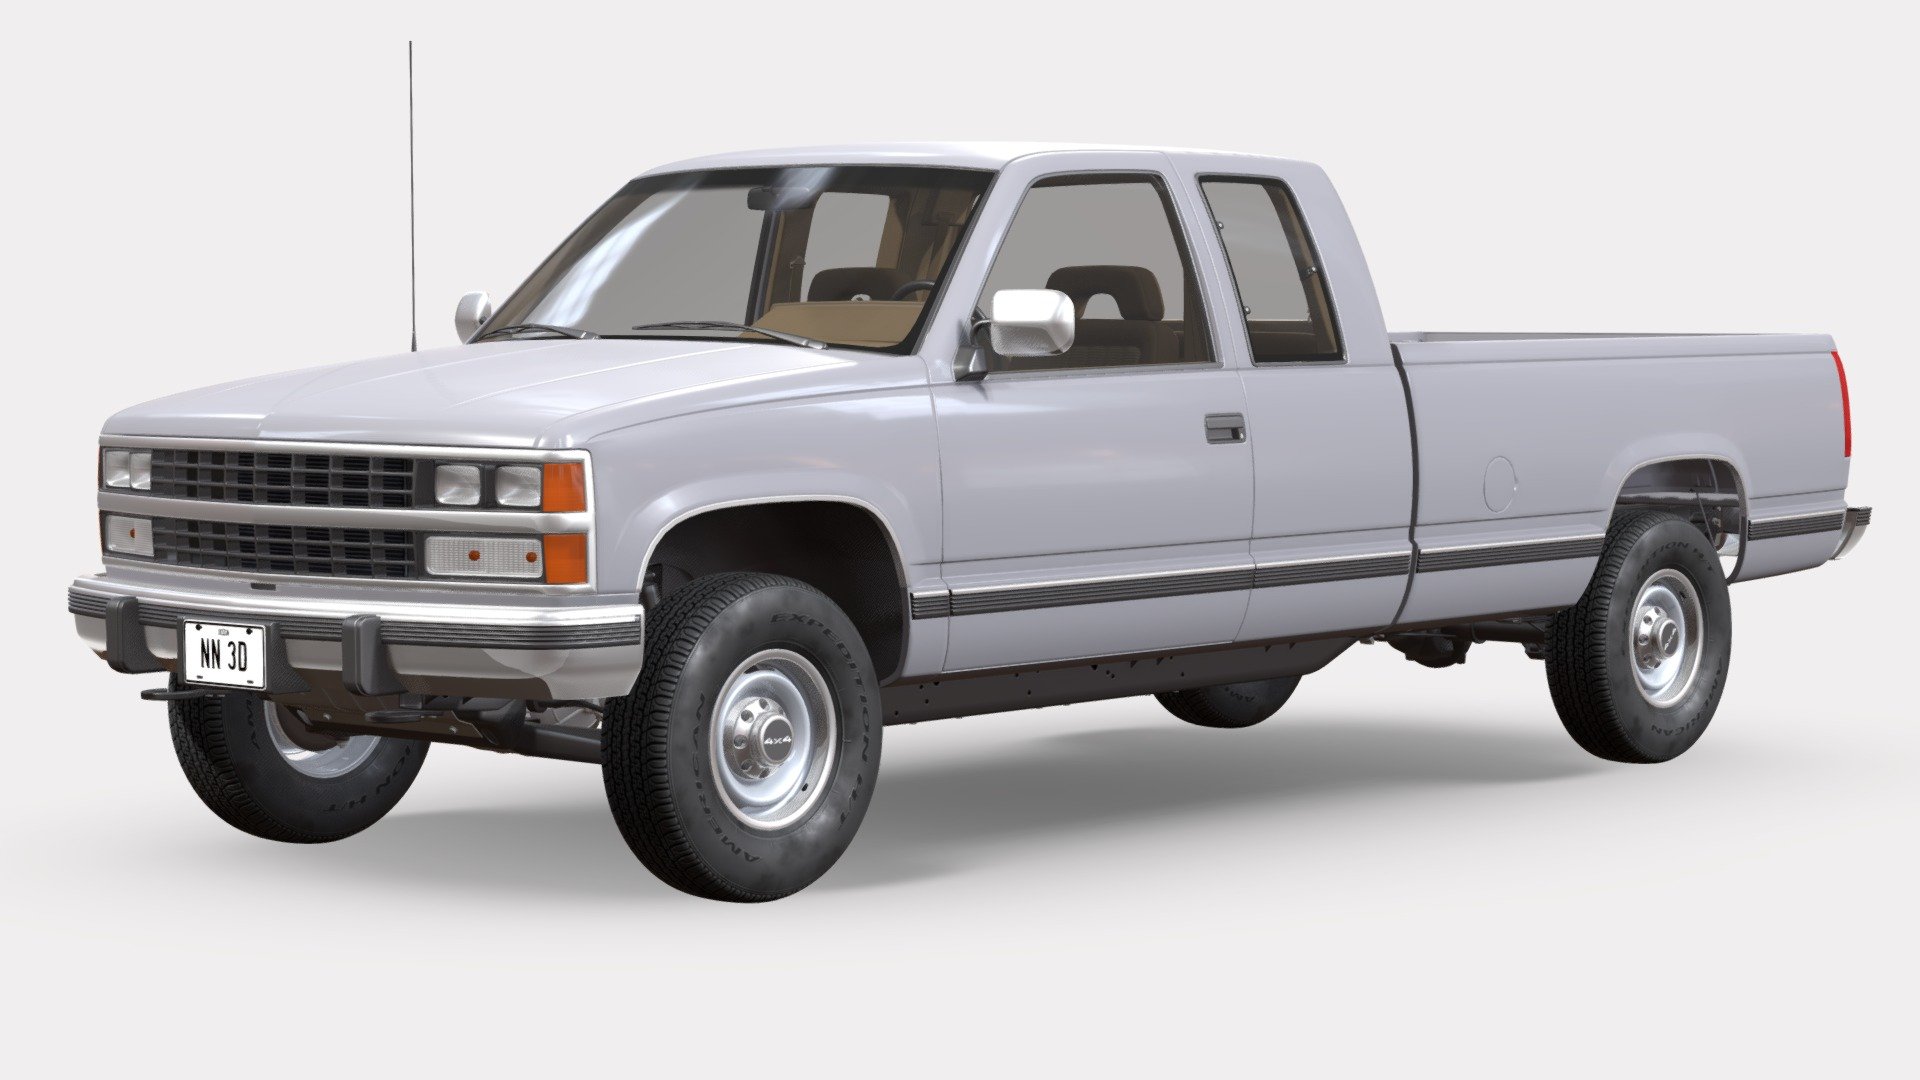 NN 3D store.

3D model of a modern extended cab dually pickup truck.

The truck's high detail exterior and interior are great for close up renders and the undercarriage has enough visible parts for close range shots.

The model was created with 3DS Max 2016 using the open subdivision modifier which has been left in the stack to adjust the level of detail.

There are also included HI and LO poly versions in Blender format with textures.

Exchange files included: FBX and OBJ with HI and LO poly versions, 3DS only with LO poly version.

SPECIFICATIONS:

The model has 173.000 polygons with subdivision level at 0 and 690.000 at level 1.

All textures are included and mapped in all files but they will render like the preview images only in 3DSMax with V-Ray, the rest of the files might have to be adjusted depending on the software you are using.

Textures are in PNG and JPG format with 4096x4096, 2048x2048 and 1024x1024 resolution 3d model